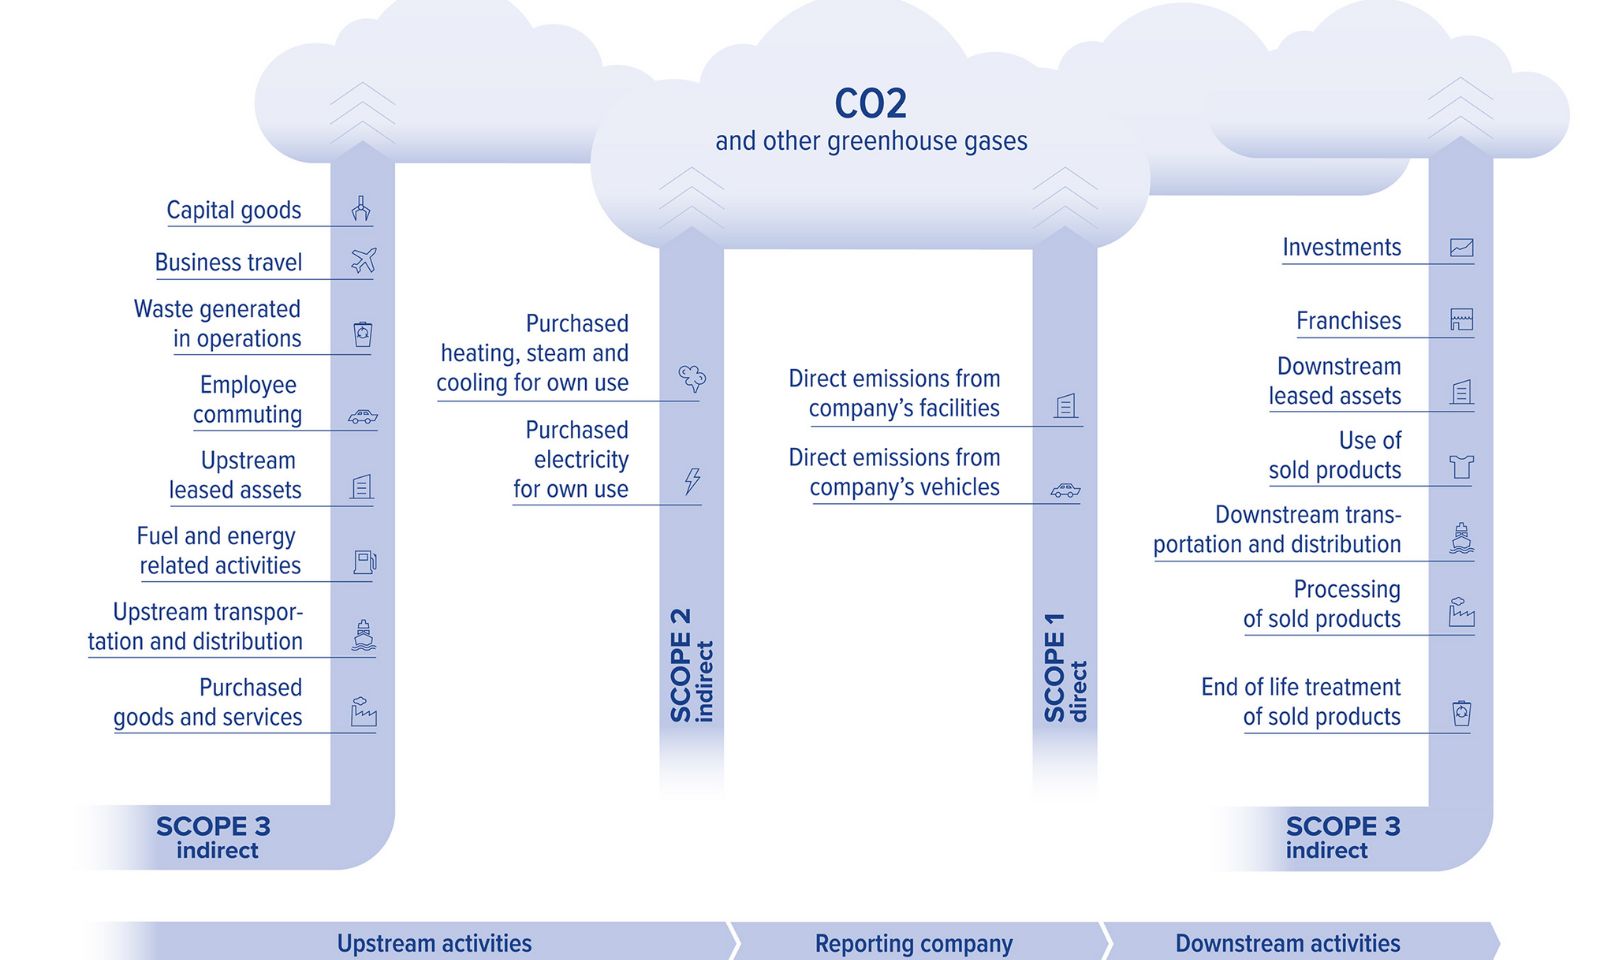 Example of the GHG protocol, outlining how the Scope 1, 2 and 3 emissions contribute to generating CO2 and other greenhouse gases.